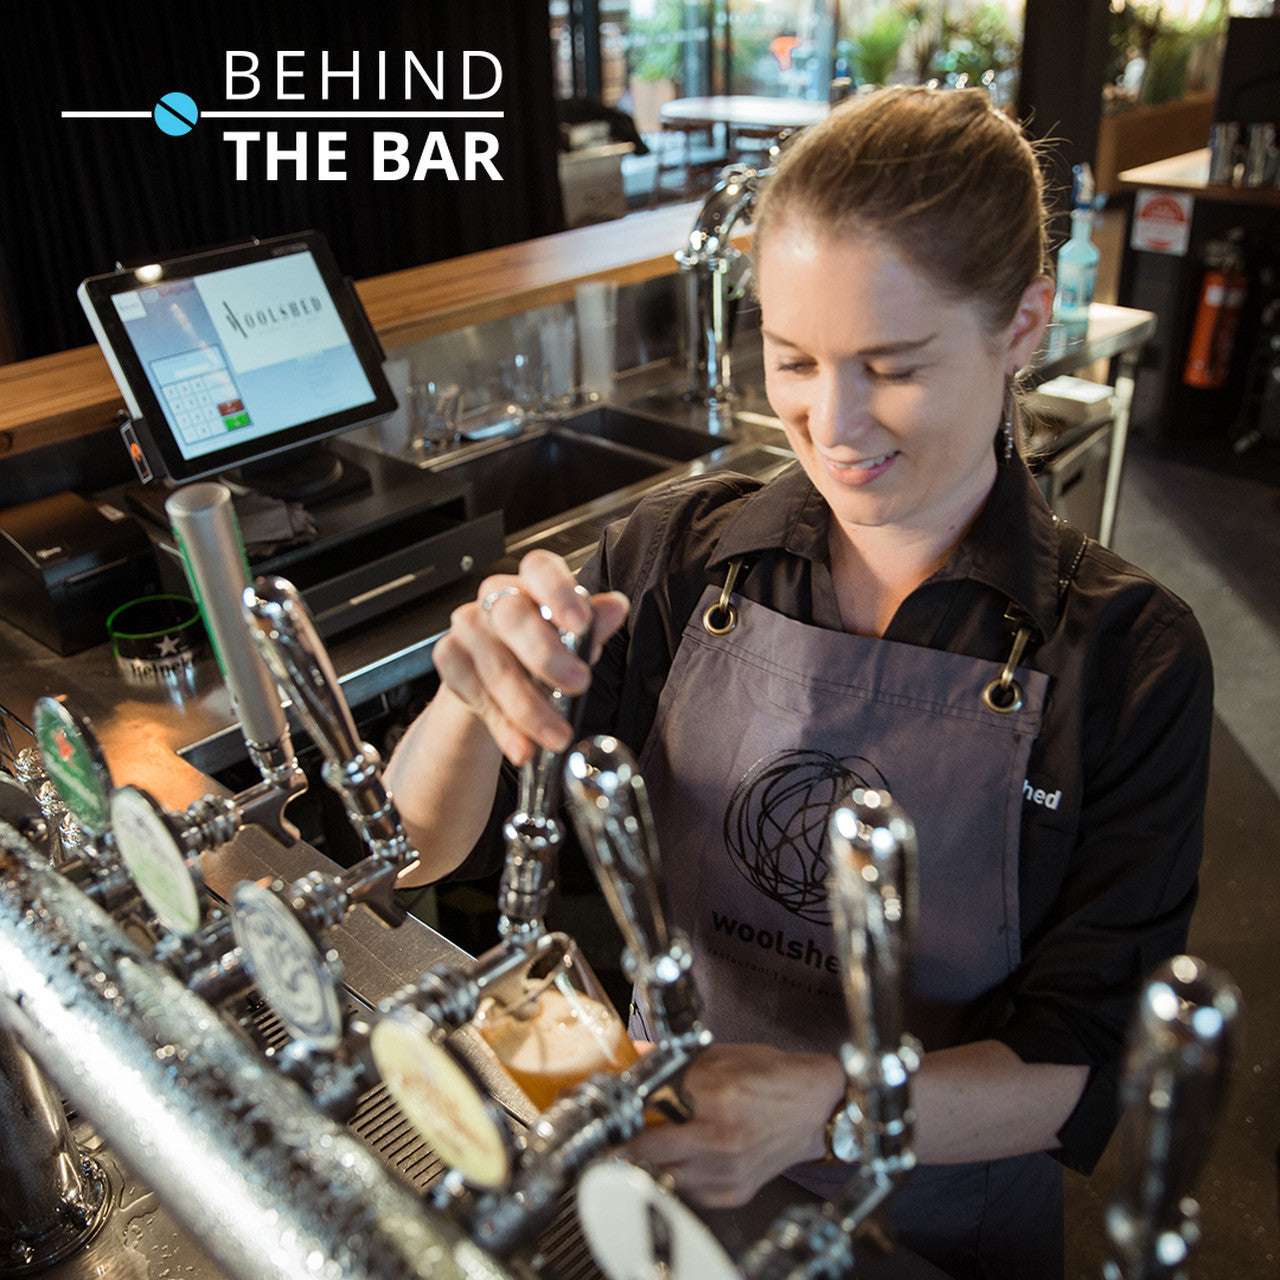 Behind the Bar with The Woolshed, Melbourne